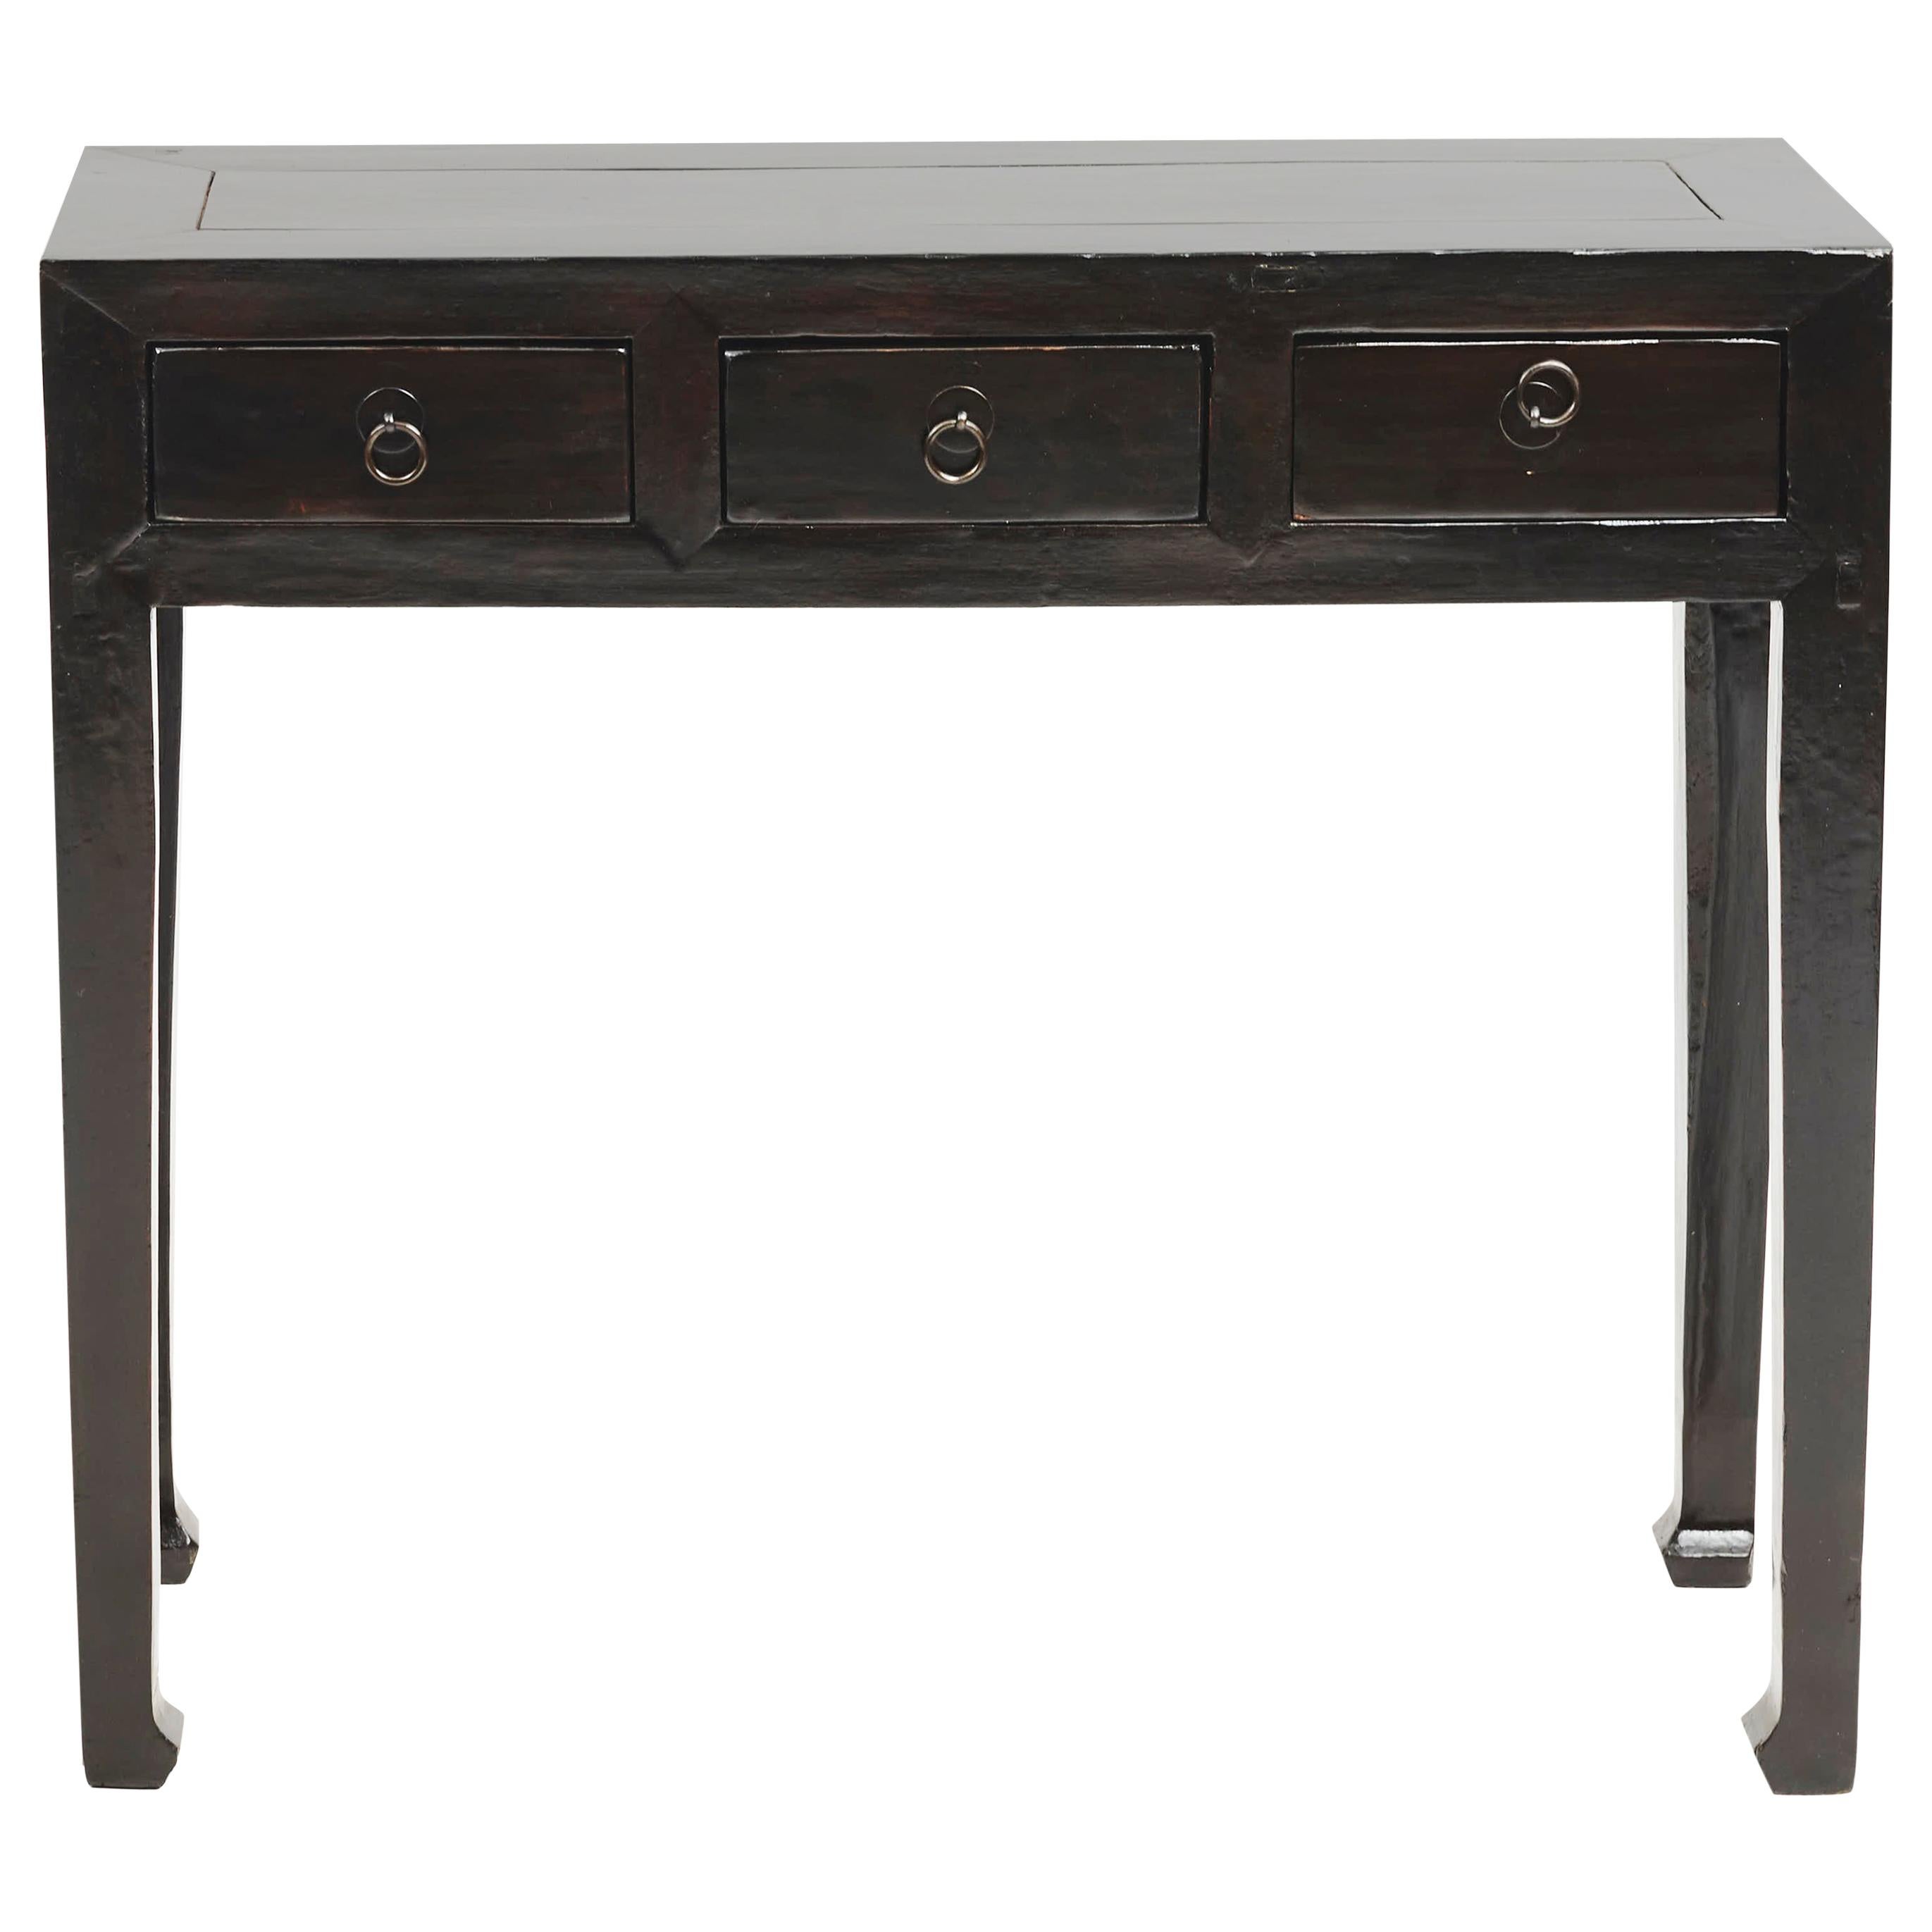 Chinese Art Deco Black Lacquer Console Table with 3 Drawers, 1900-1920